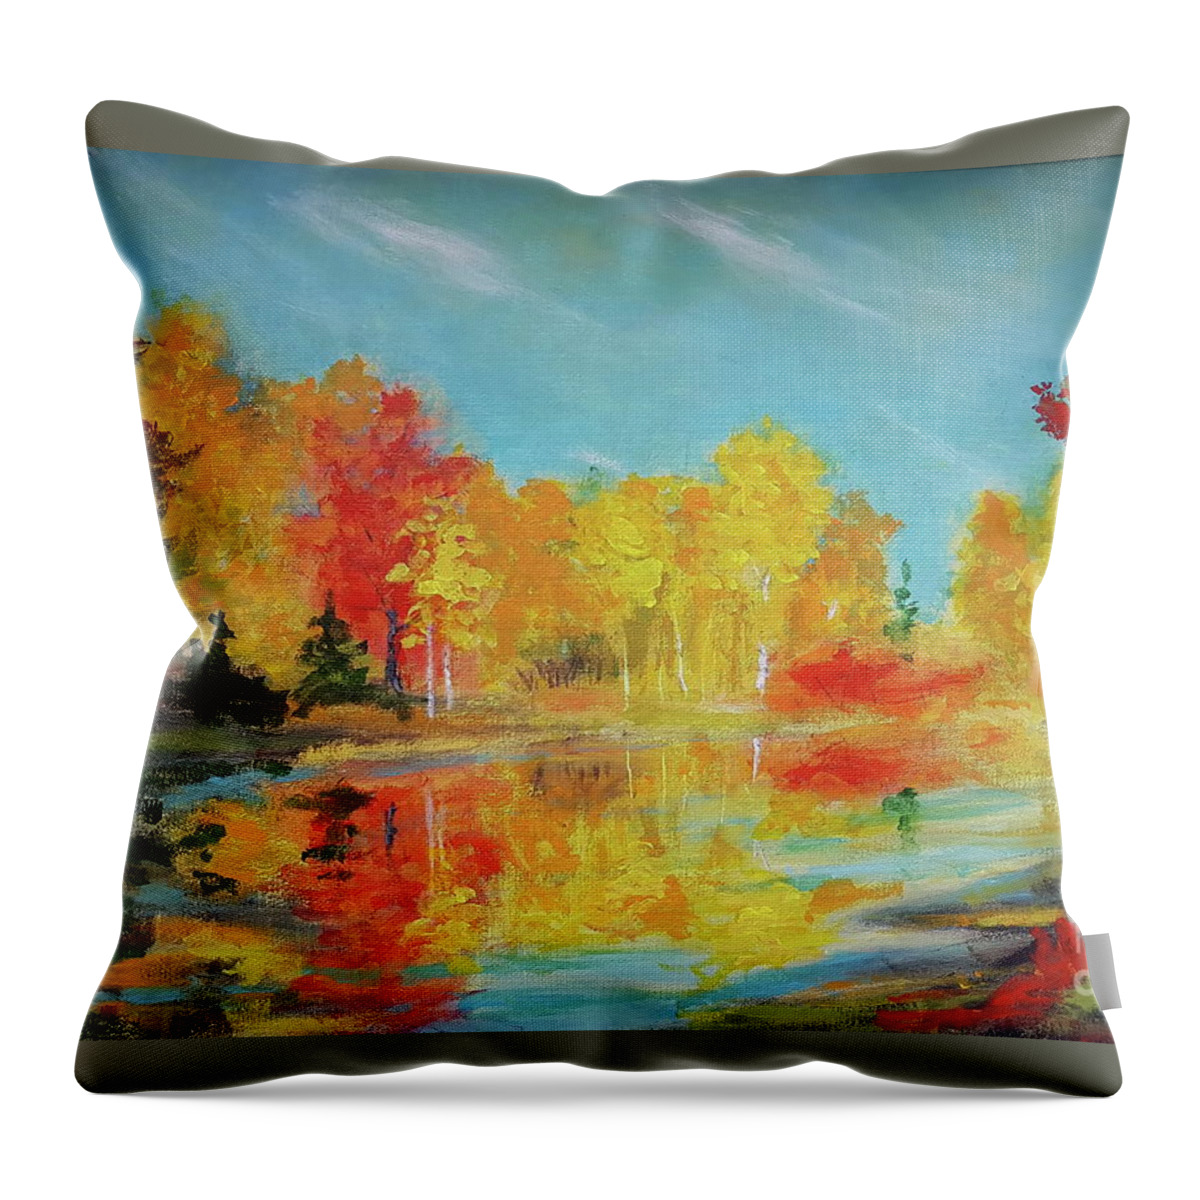 Acrylic Throw Pillow featuring the painting Fall Impressions by Petra Burgmann